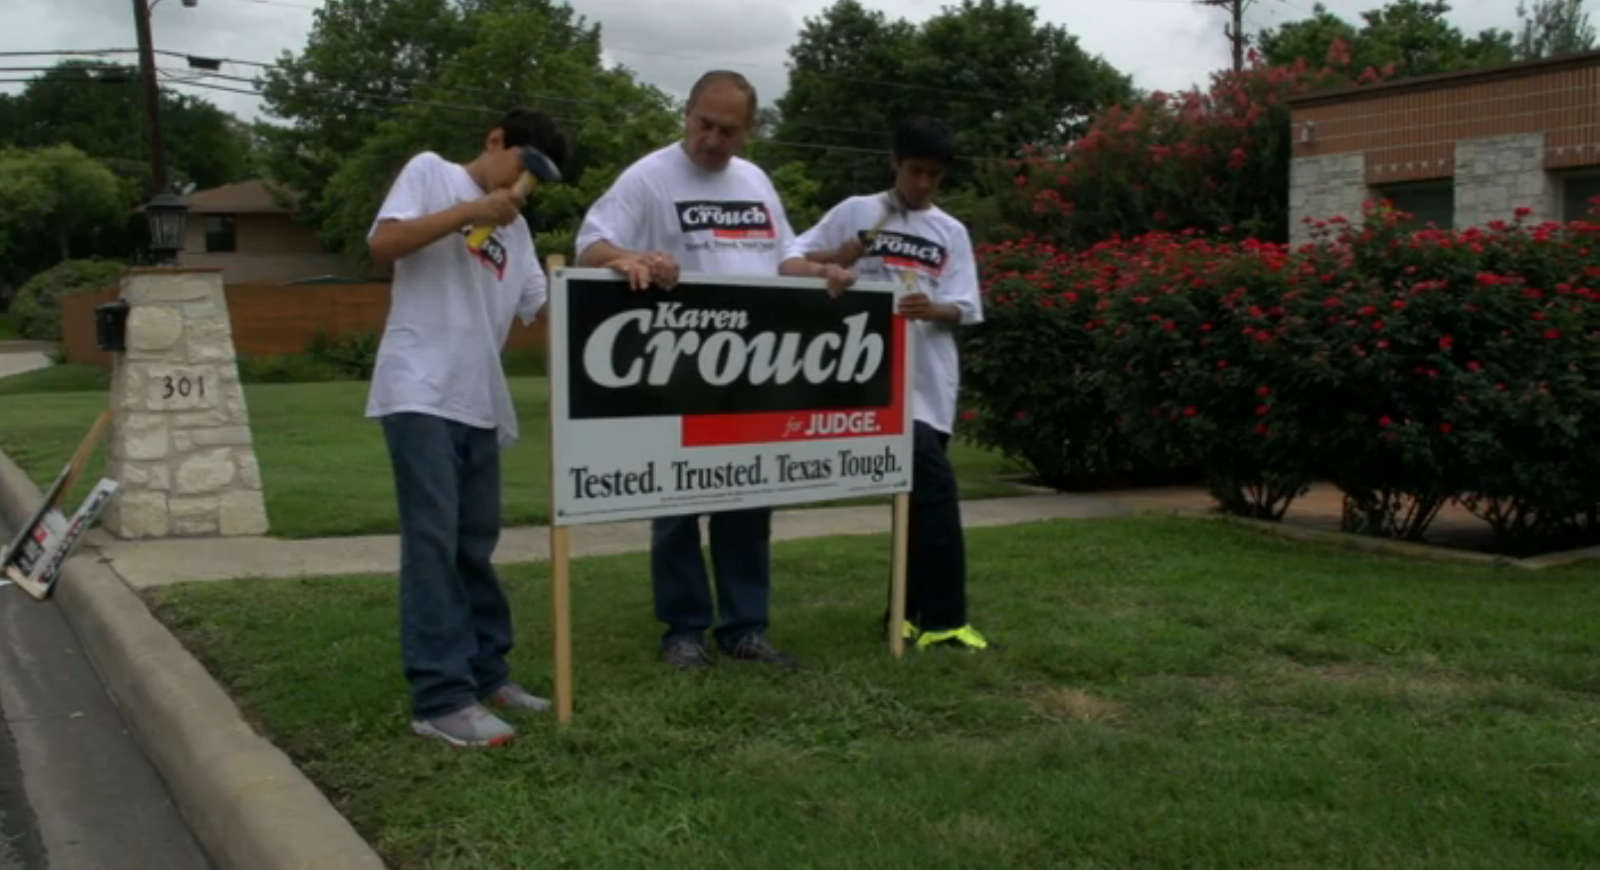 Sons Nicholas and Gerald with their father Gerald Flores are the sign crew for team Crouch.